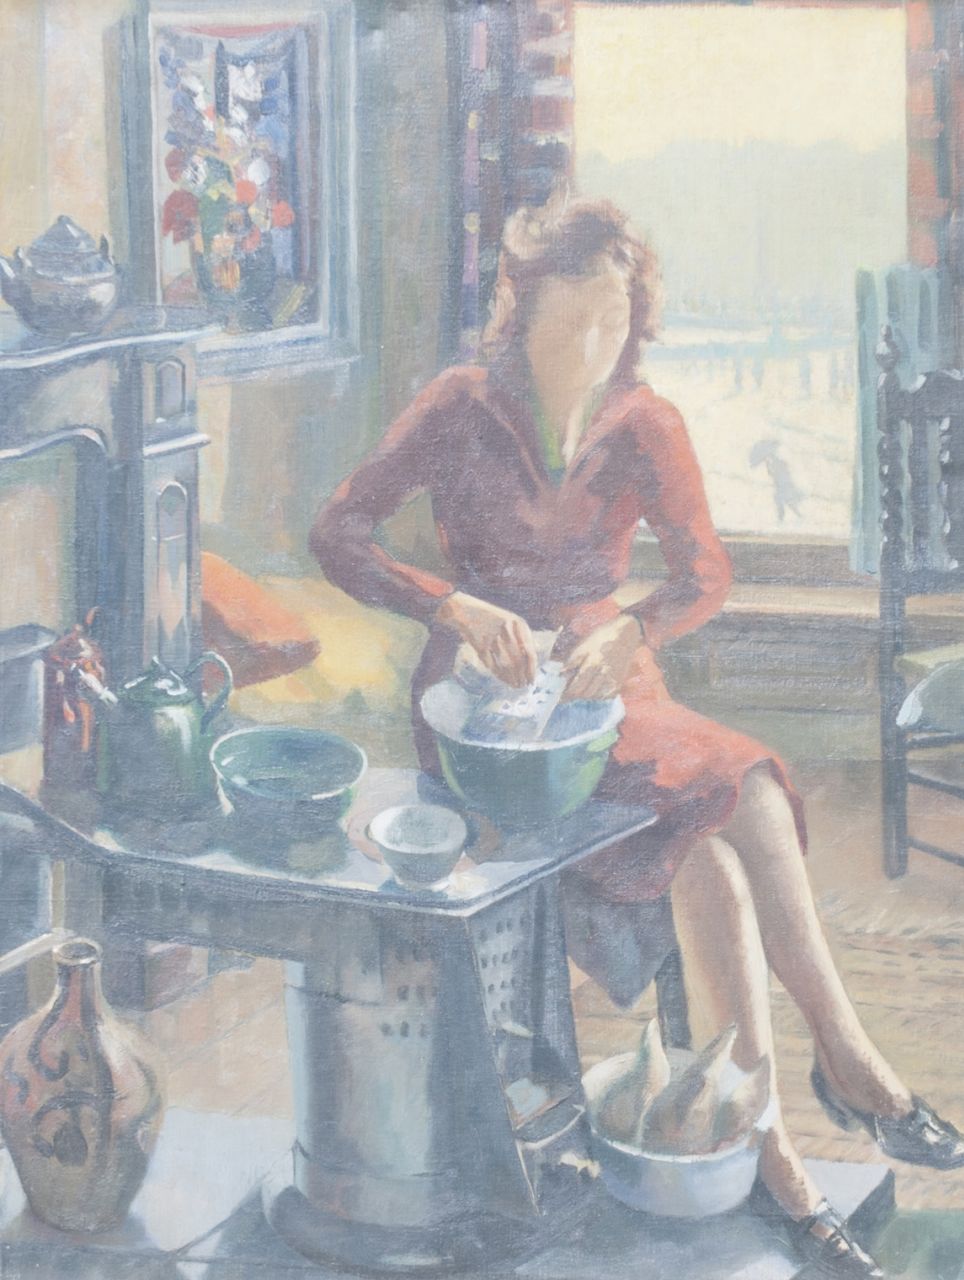 Pluijmers A.B.  | Anthonie Bernardus 'Toon' Pluijmers | Paintings offered for sale | Prepairing the meal, oil on canvas 80.3 x 60.4 cm, painted ca. 1945, without frame